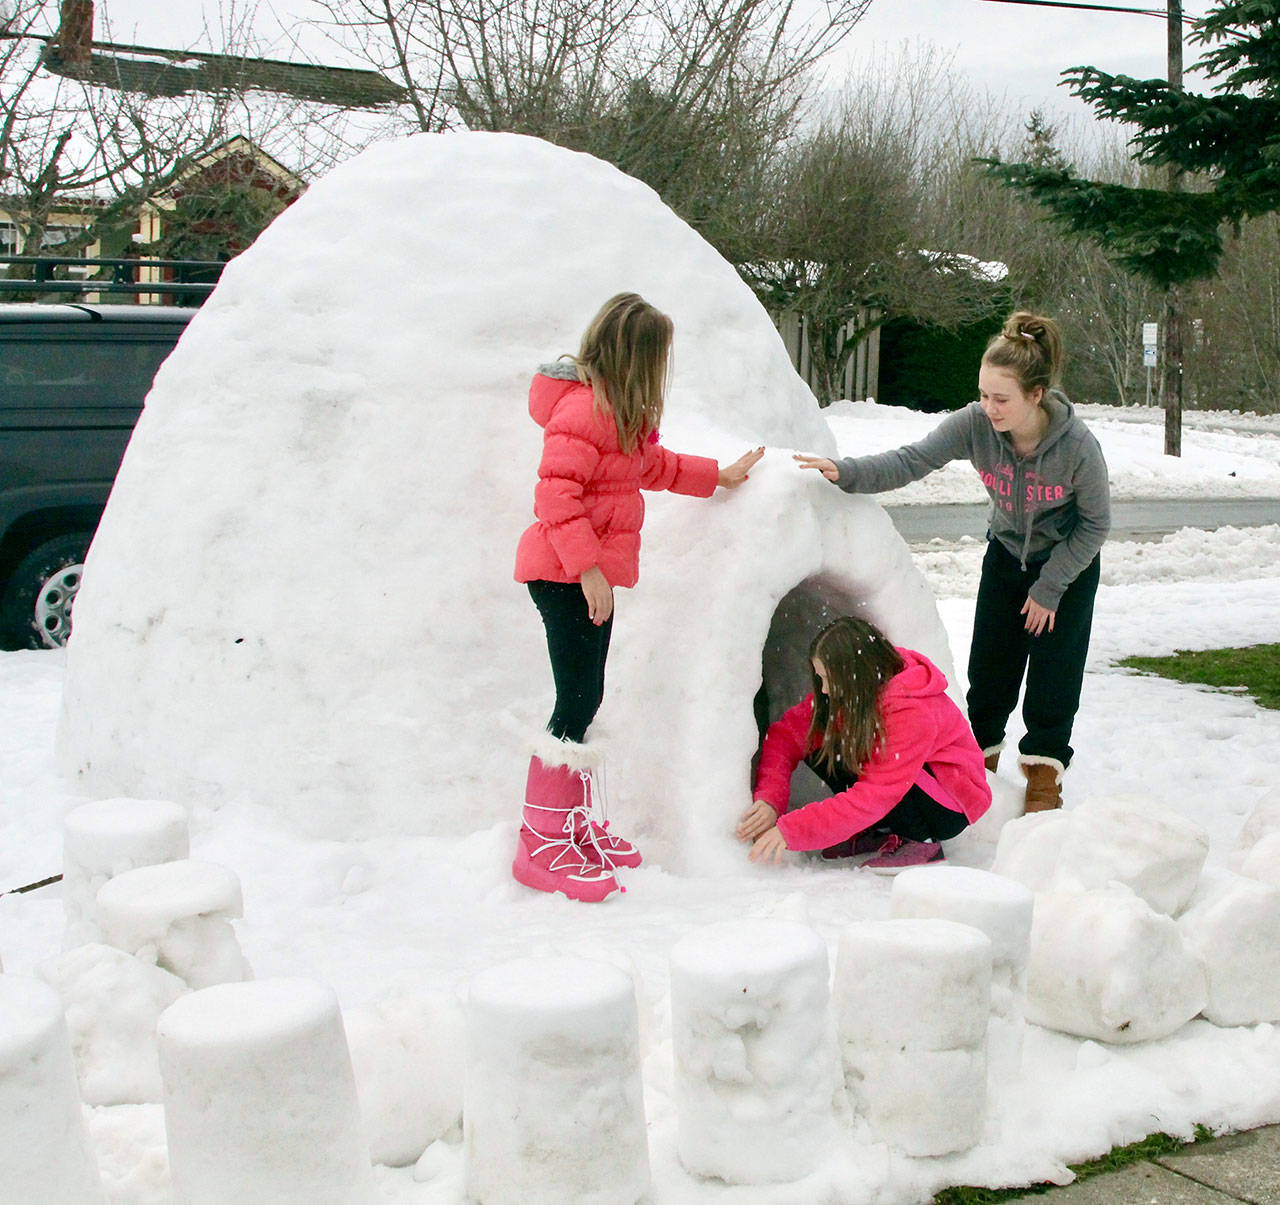 Anella Henning, age 7, Kendra Dickinson, age 11, and Mallory Dickinson, age 13, inspect the craftsmanship of the igloo constructed by families at Fifth and Albert streets in east Port Angeles this week. (Dave Logan/for Peninsula Daily News)